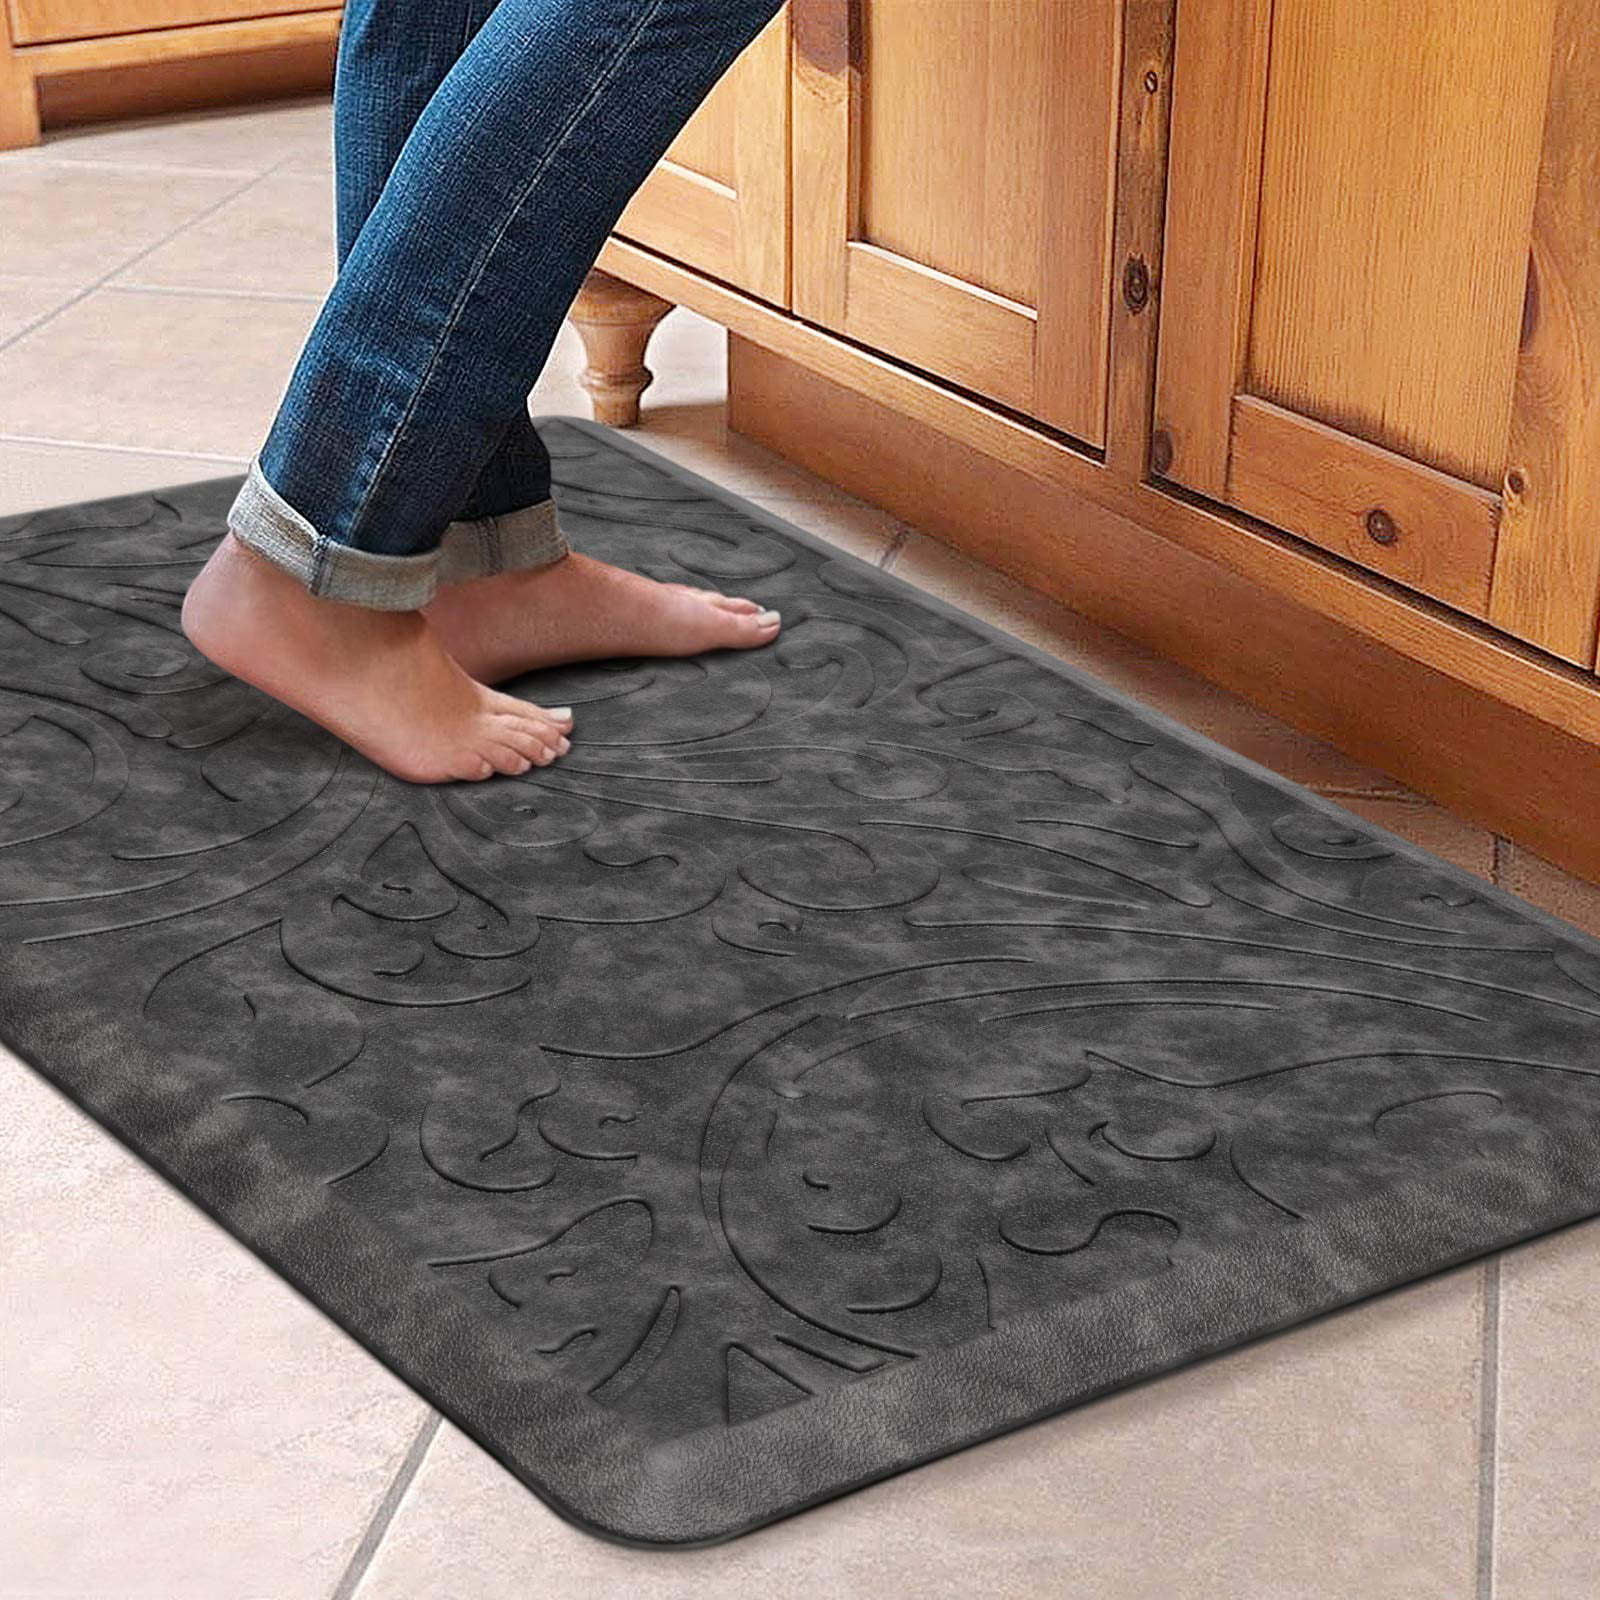  Homergy Anti Fatigue Kitchen Mats for Floor 1 PCS, Memory Foam  Cushioned Rugs, Comfort Standing Desk Mats for Office, Home, Laundry Room,  Waterproof & Ergonomic, 17.3×30.3, Fabric Black: Home & Kitchen